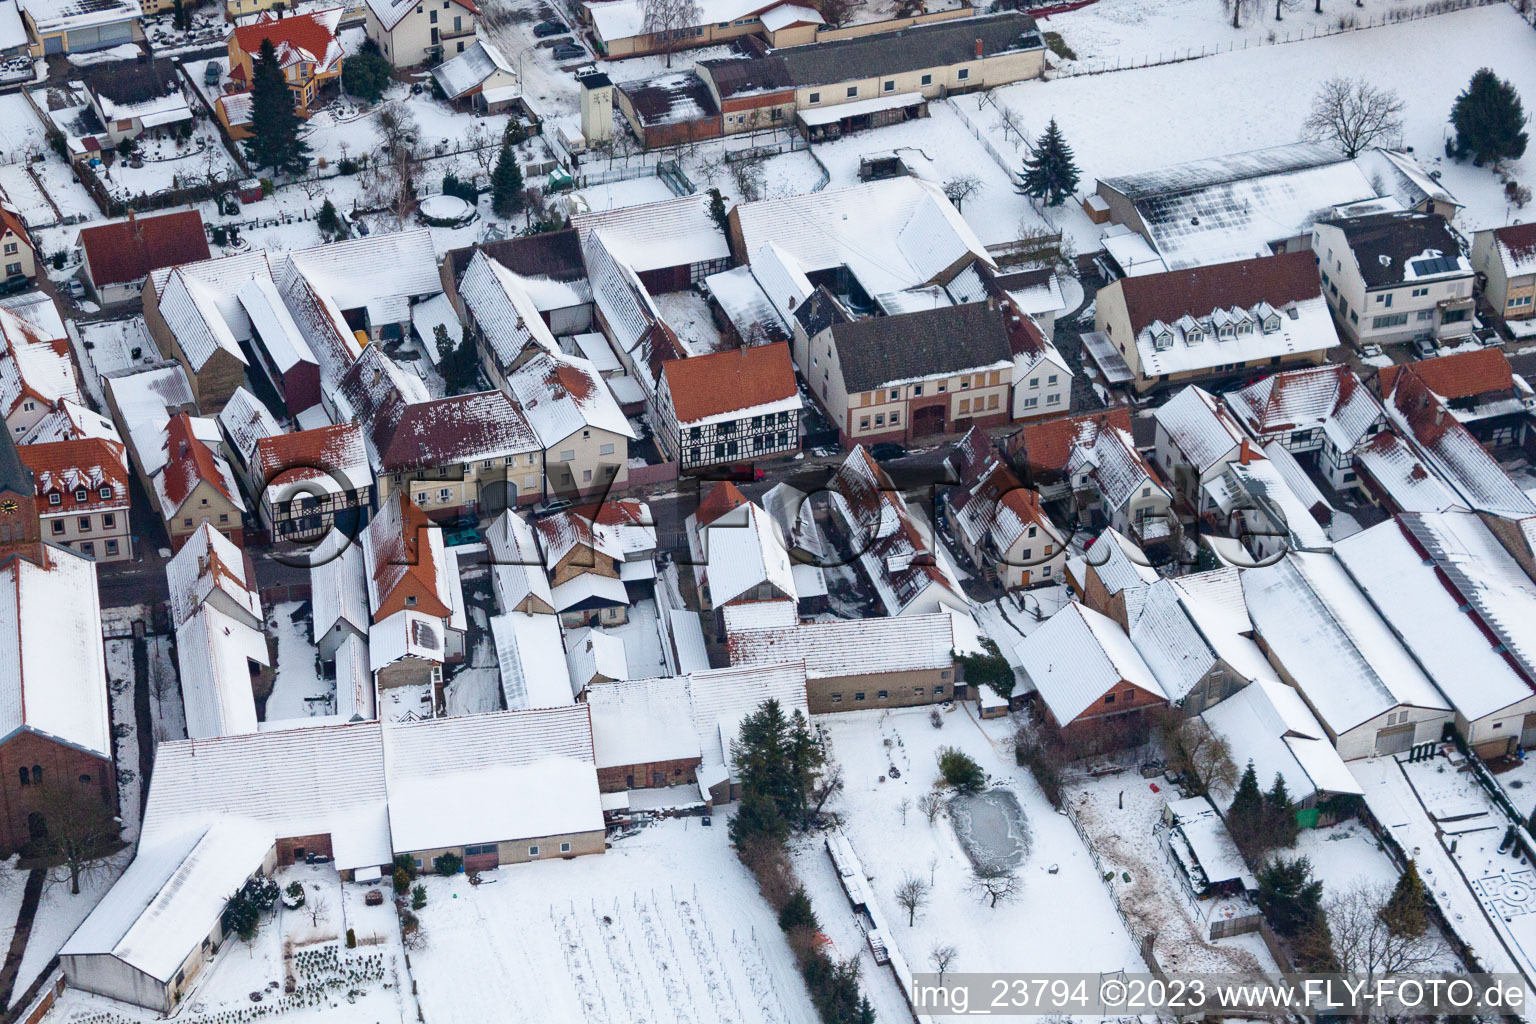 Steinweiler in the state Rhineland-Palatinate, Germany from the drone perspective